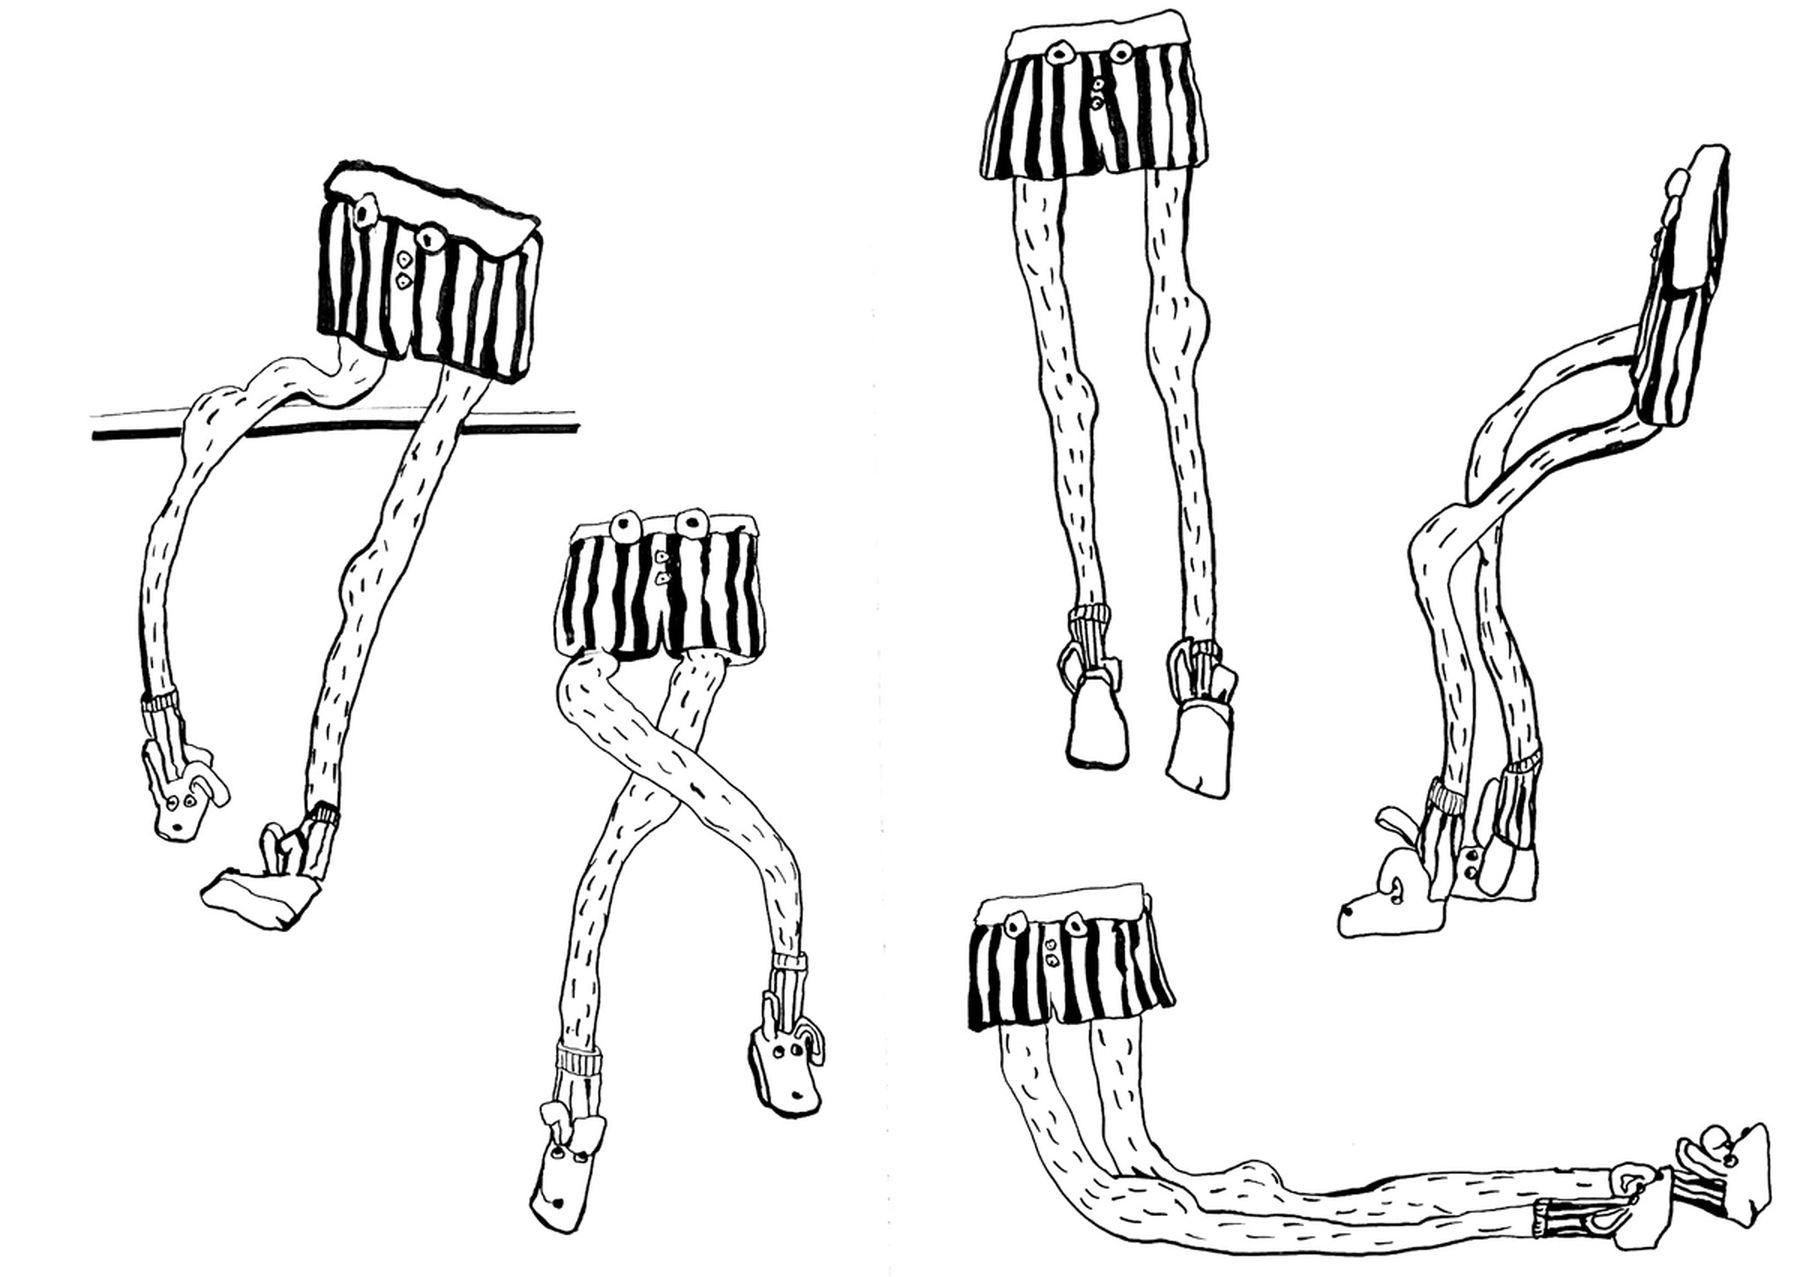 A black and white pen illustration of hairy legs dressed in boxers shorts with eyes.  There are five with each pair of legs posed in different positions.